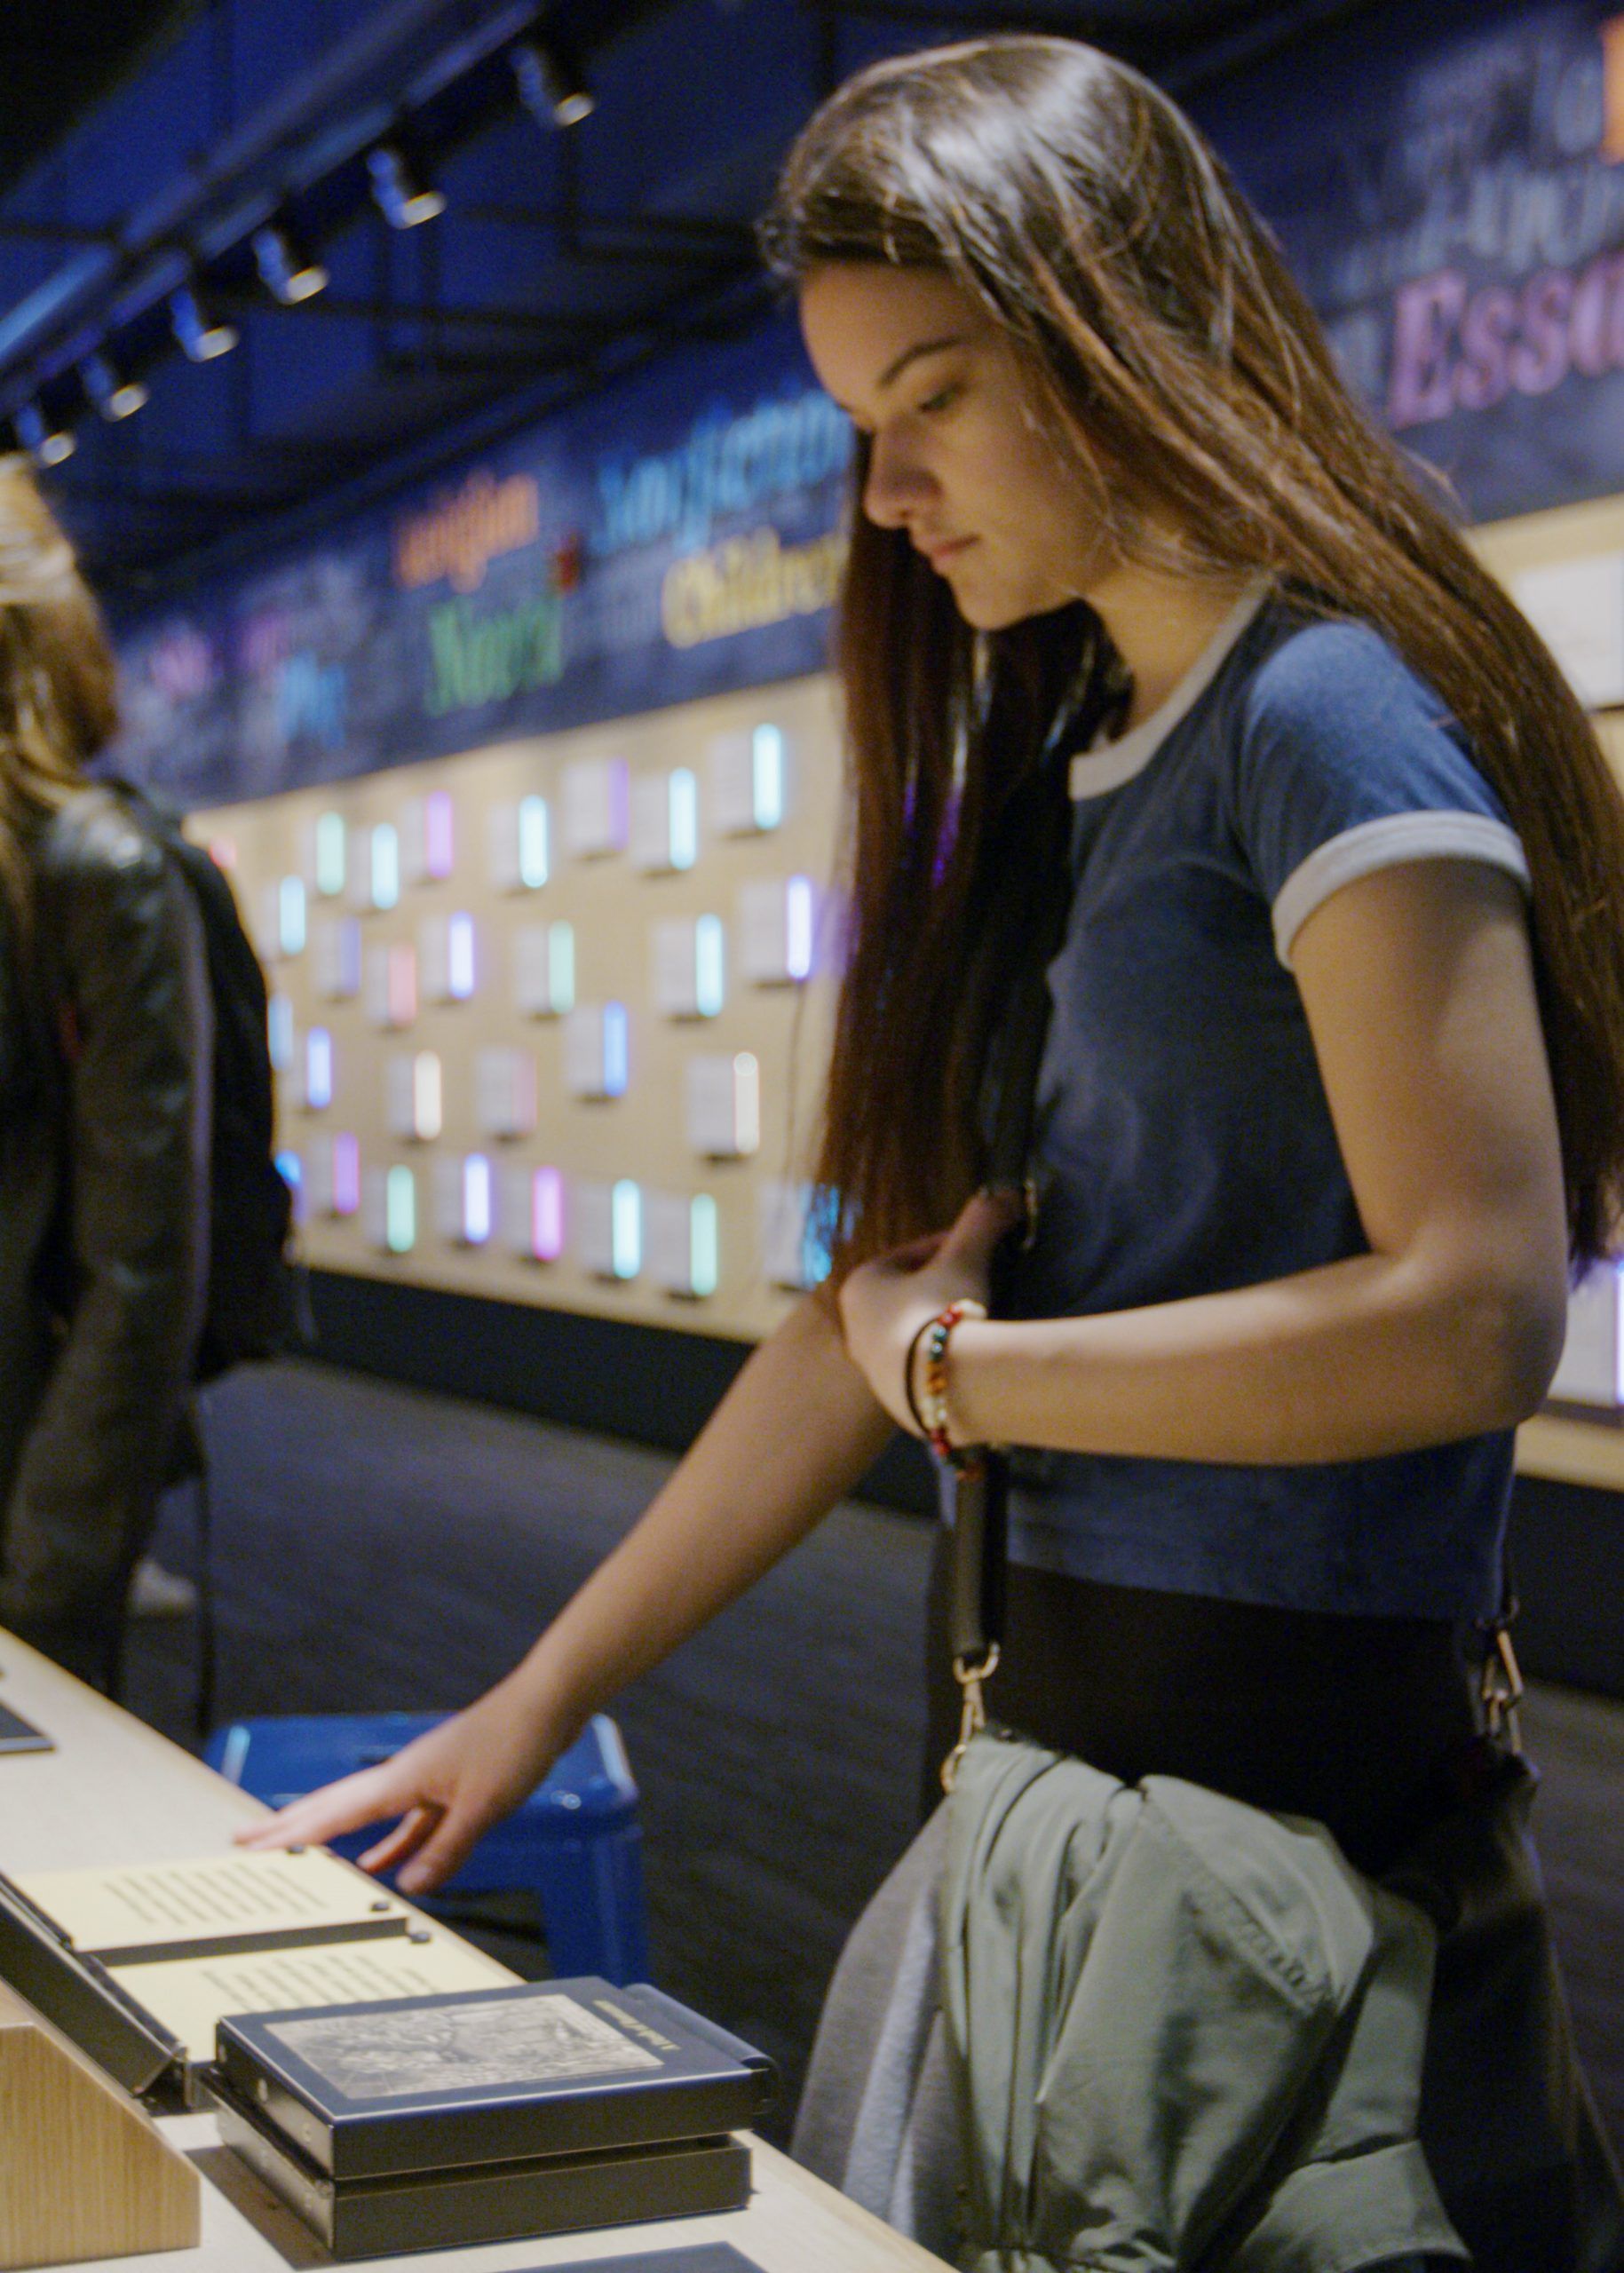 A teen girl on a field trip looks at an exhibit at the American Writers Museum